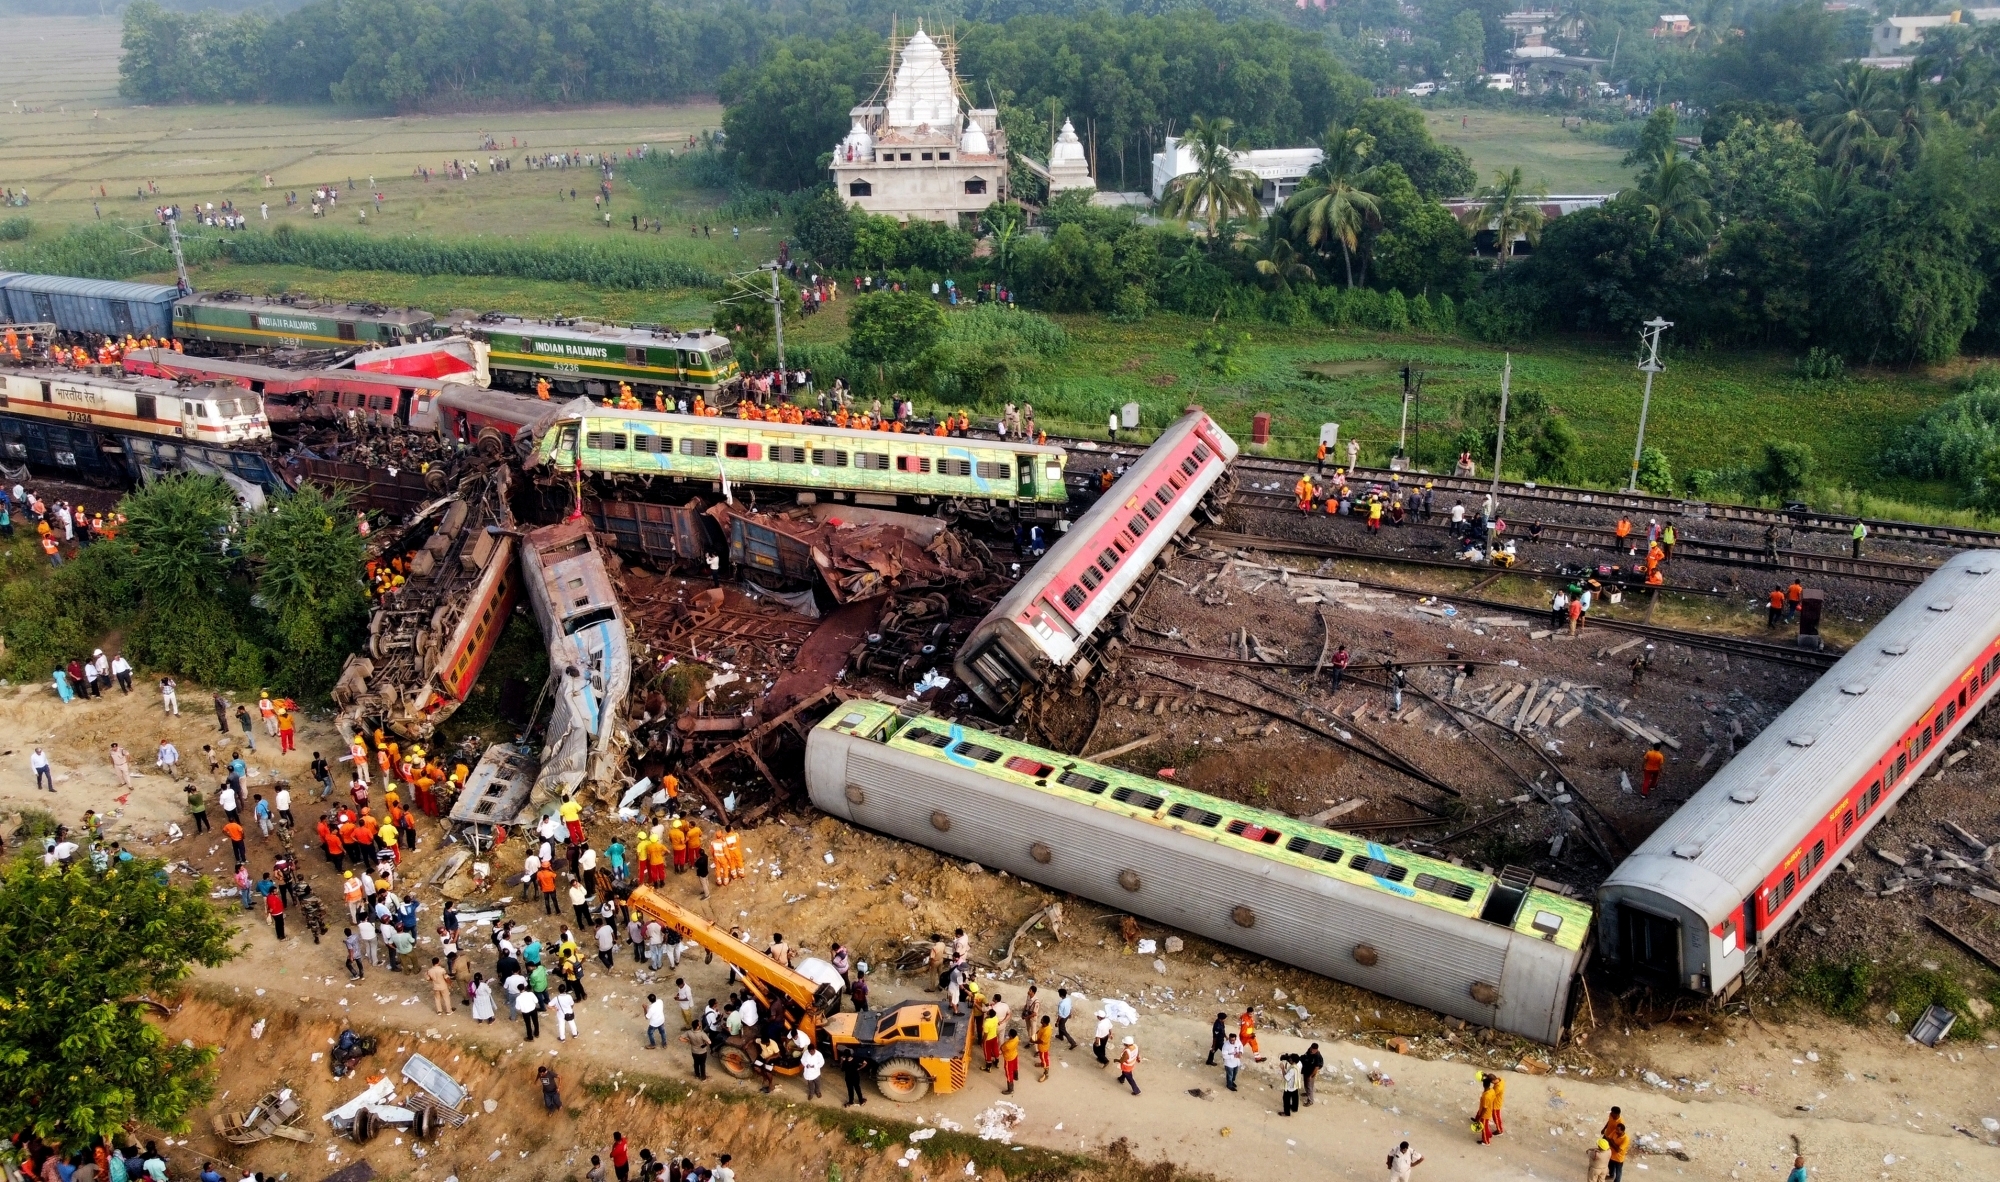  Odisha Train Tragedy: Only Small Number Of Passengers Opted For Insurance Cover-TeluguStop.com